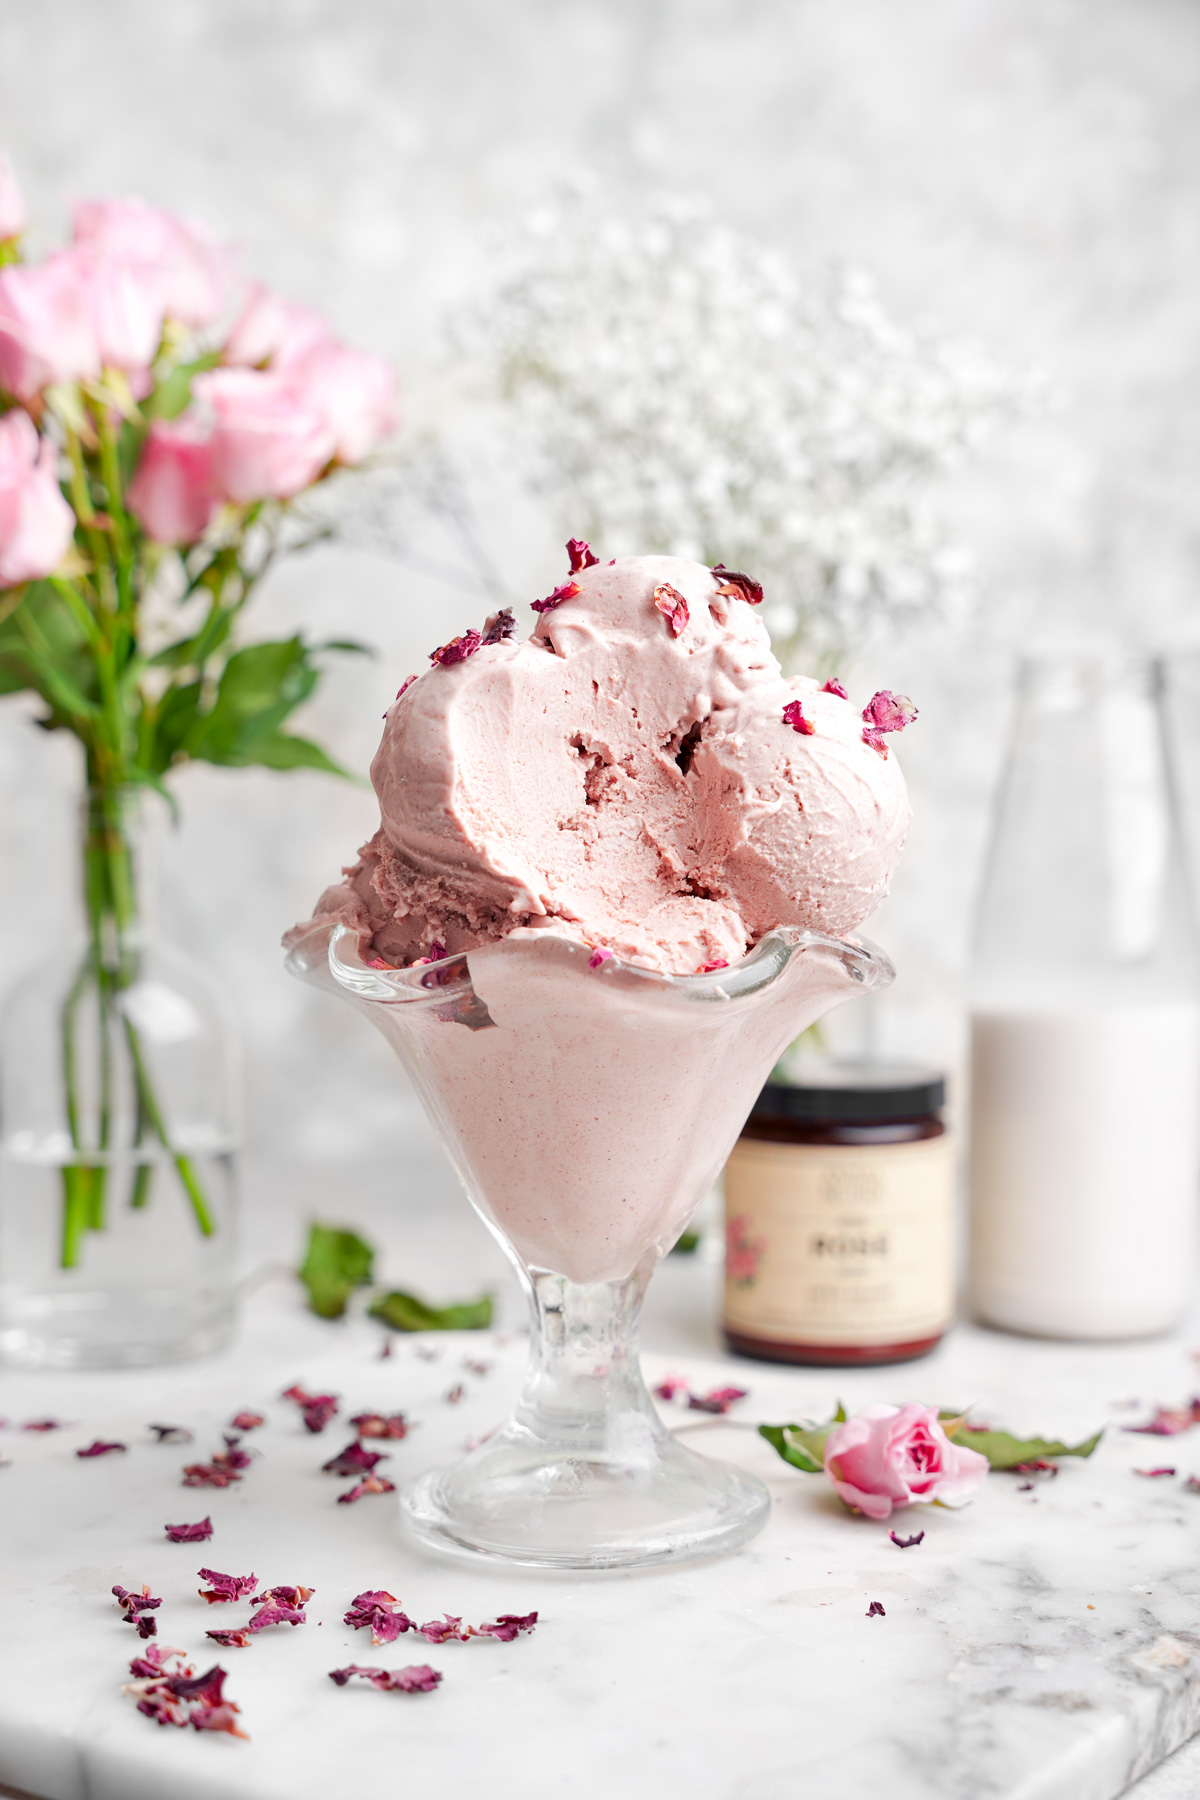 the rose ice cream with a scoop taken out of it to show the creamy texture